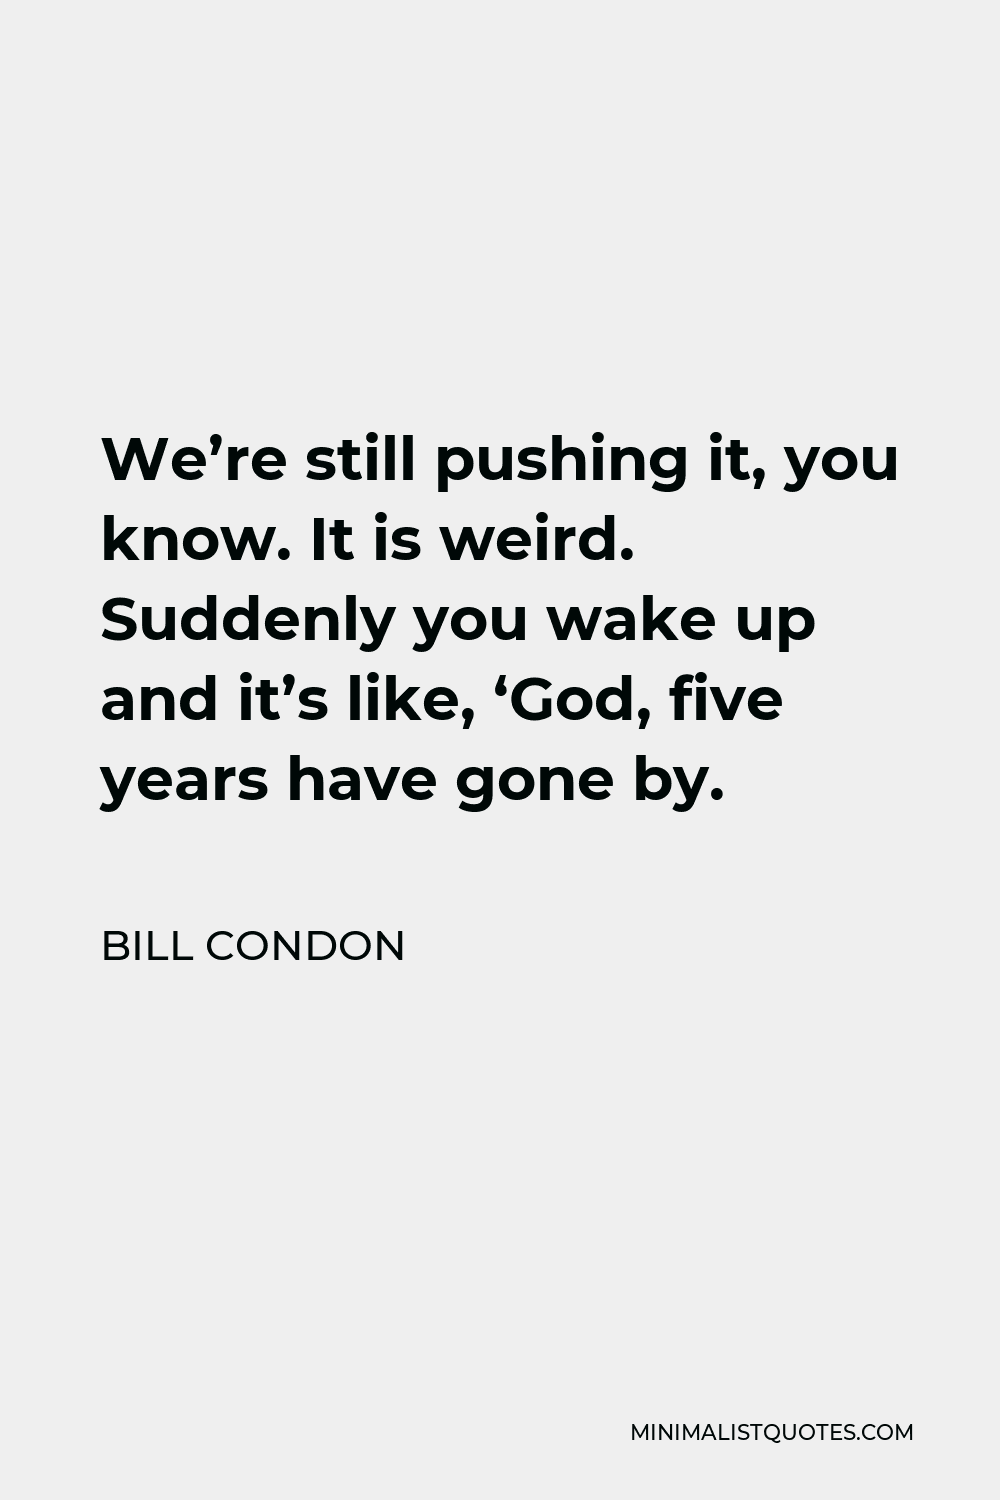 Bill Condon Quote - We’re still pushing it, you know. It is weird. Suddenly you wake up and it’s like, ‘God, five years have gone by.